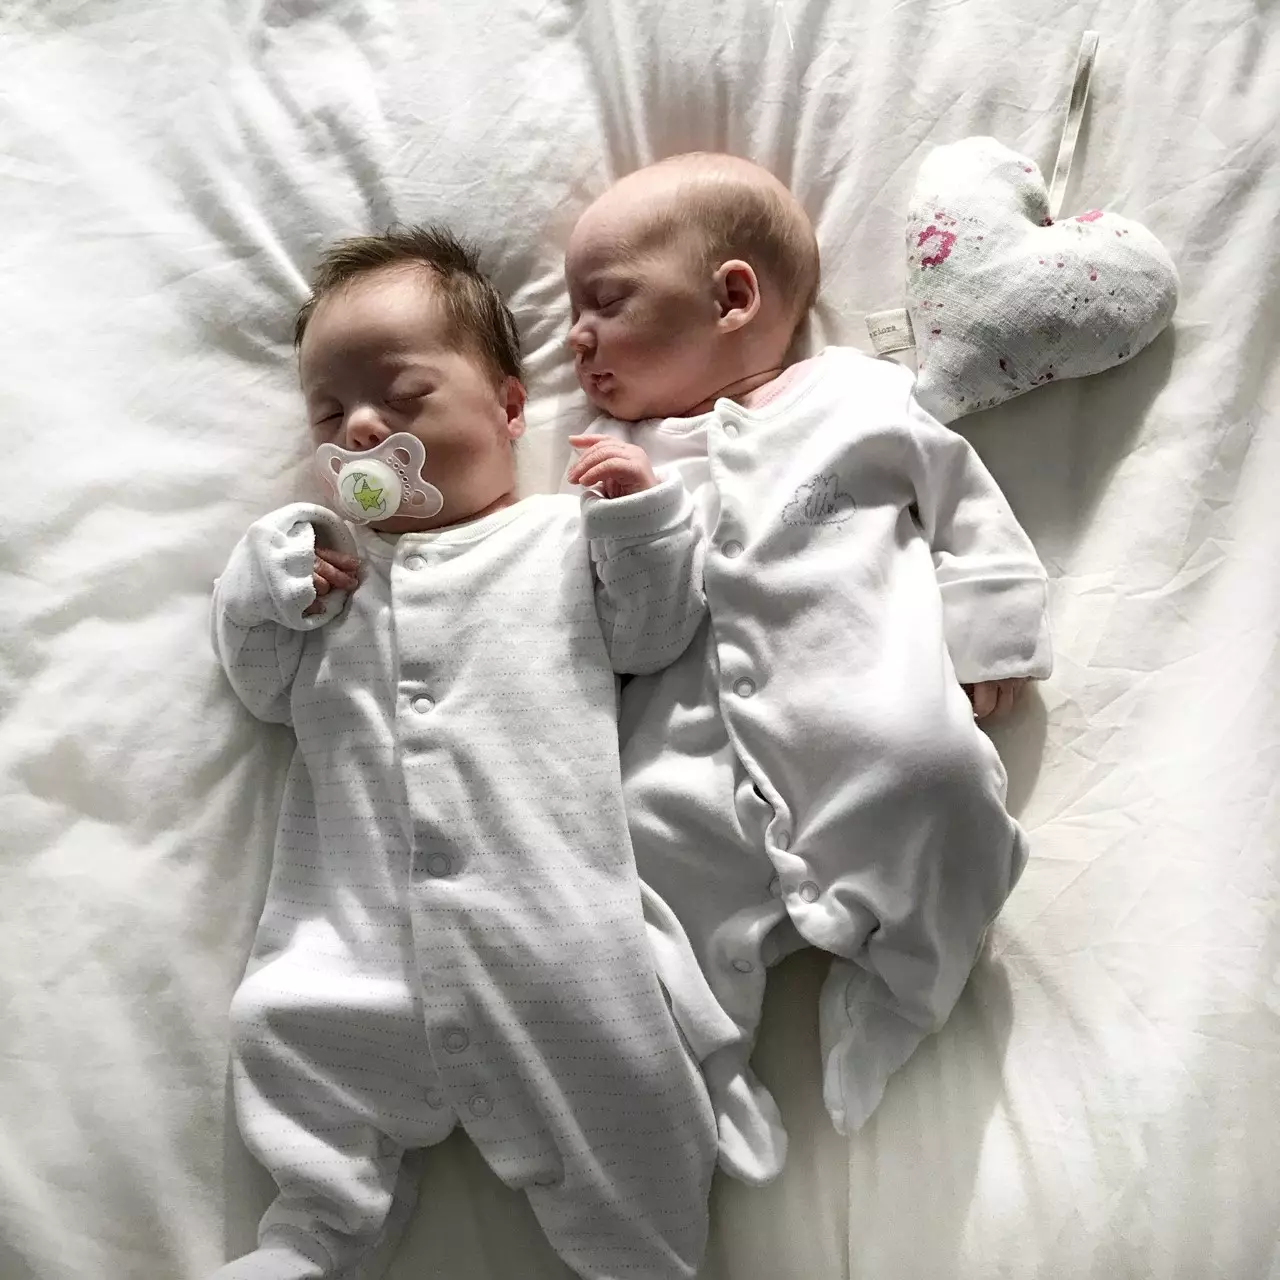 Harper and Quinn were born at 32 weeks (